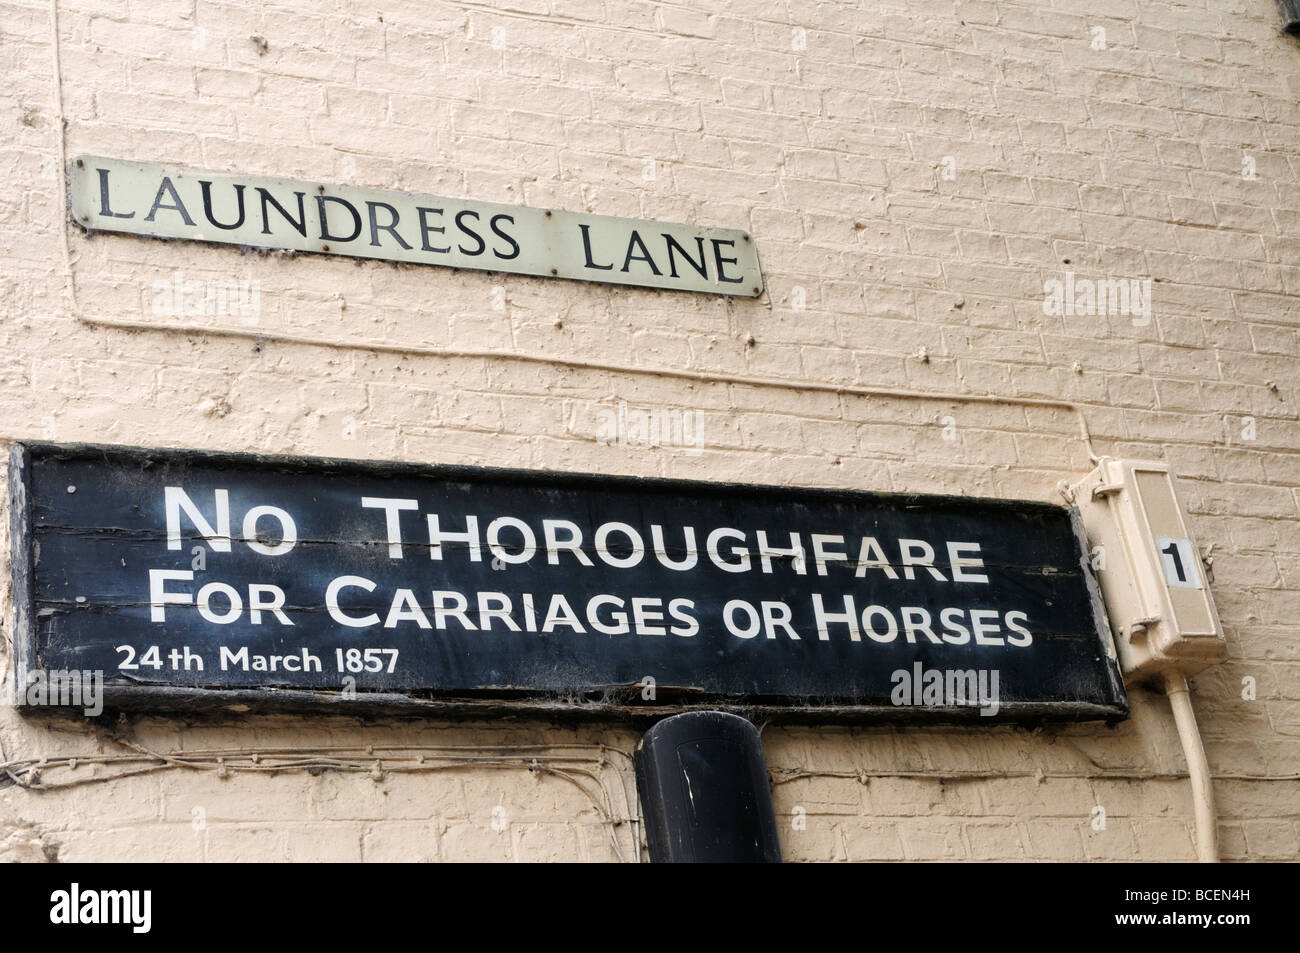 'No thoroughfare for carriages or horses 24th March 1857' notice in Laundress lane, Cambridge England Uk Stock Photo